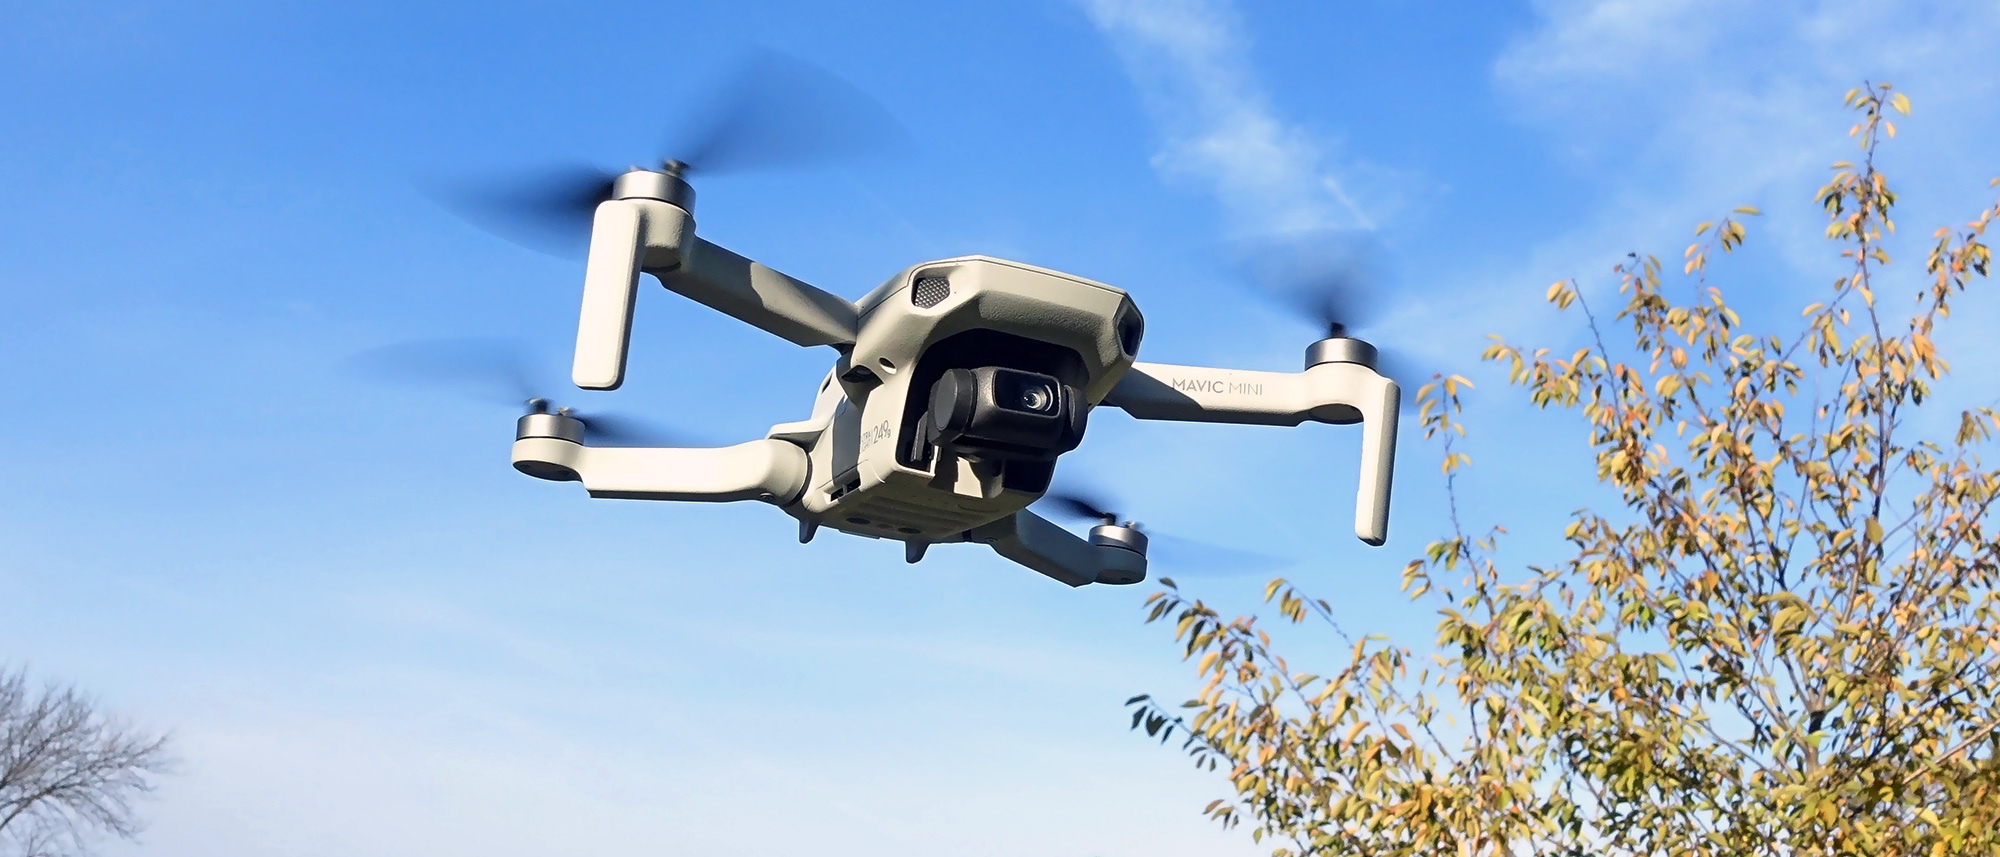 THE BEST DRONES IN 2022, ARE BASED ON DESIGN, EASE OF USE, CAMERA QUALITY, DURABILITY, & FLIGHT TIME.